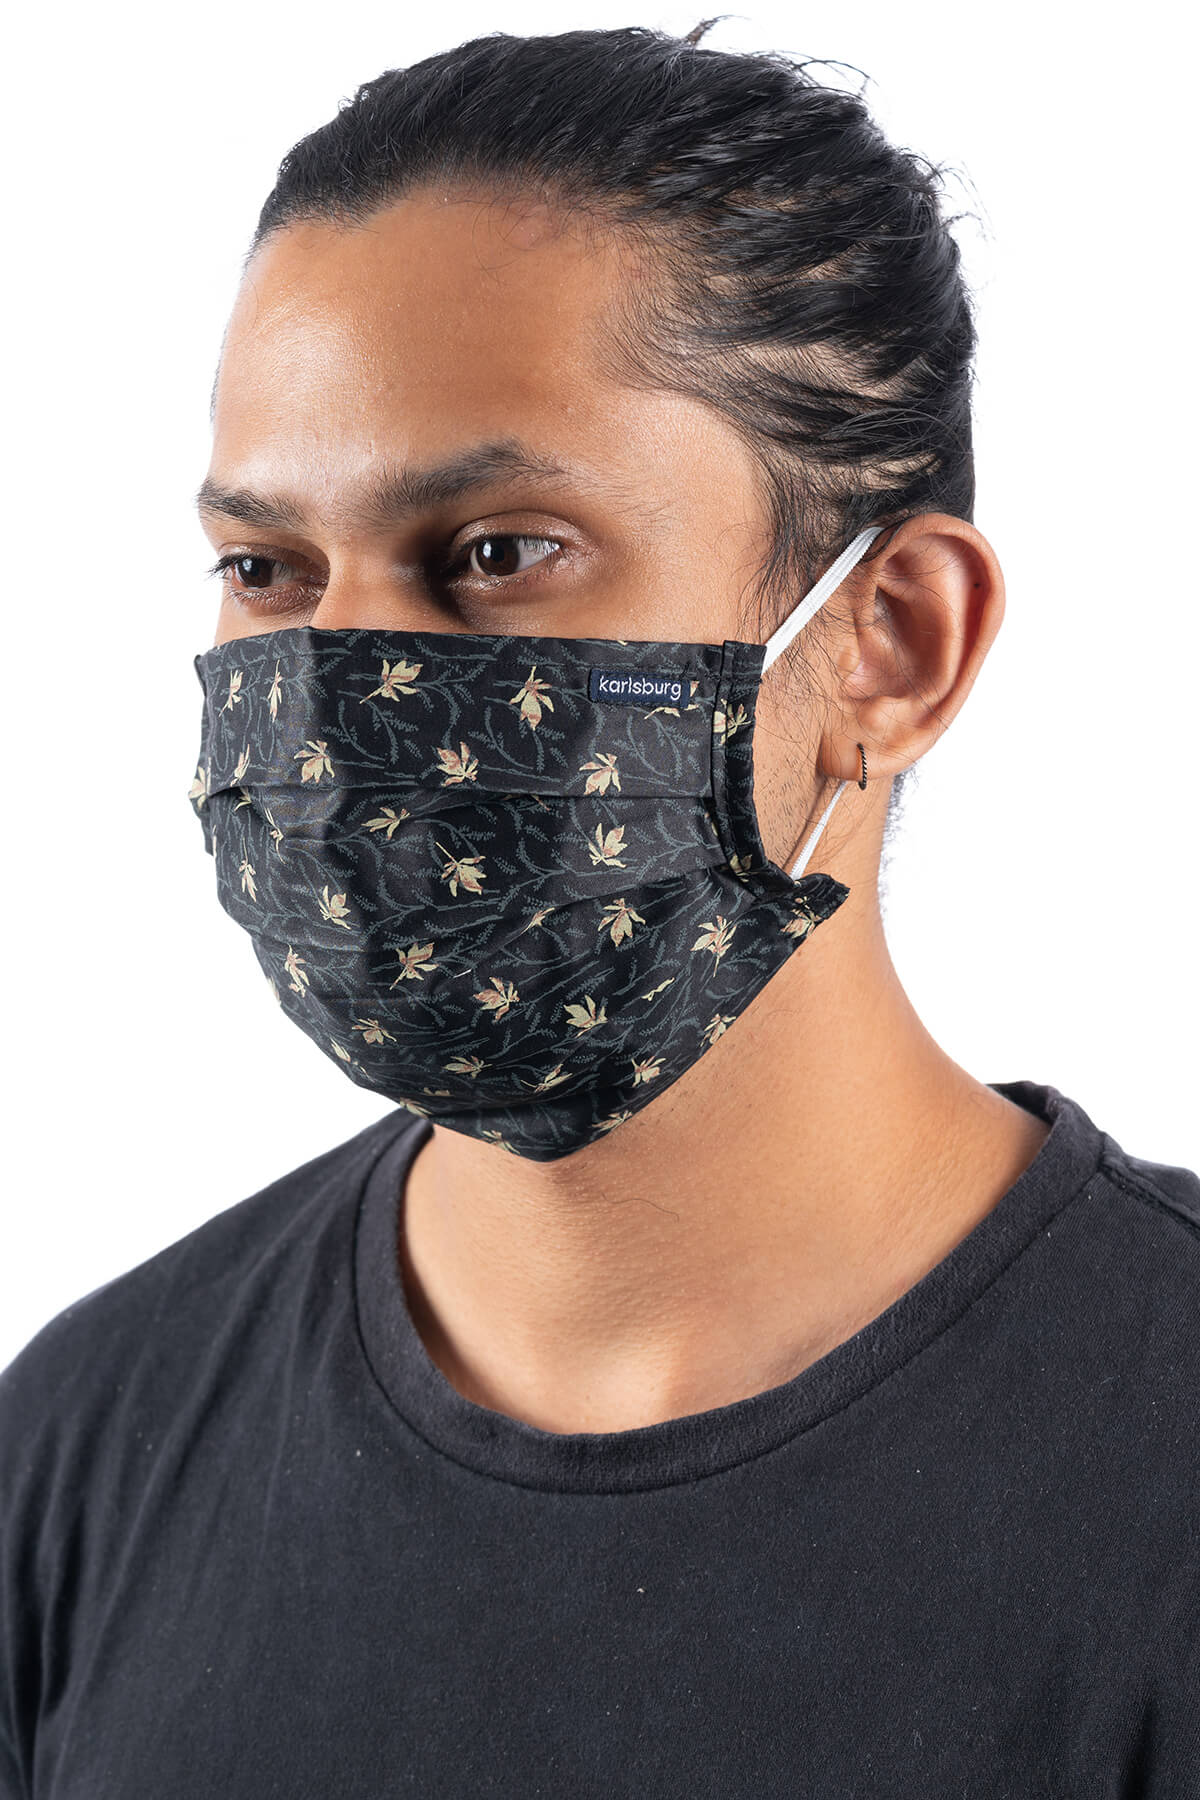 Black and Grey Adult Face Mask - Pack of 10